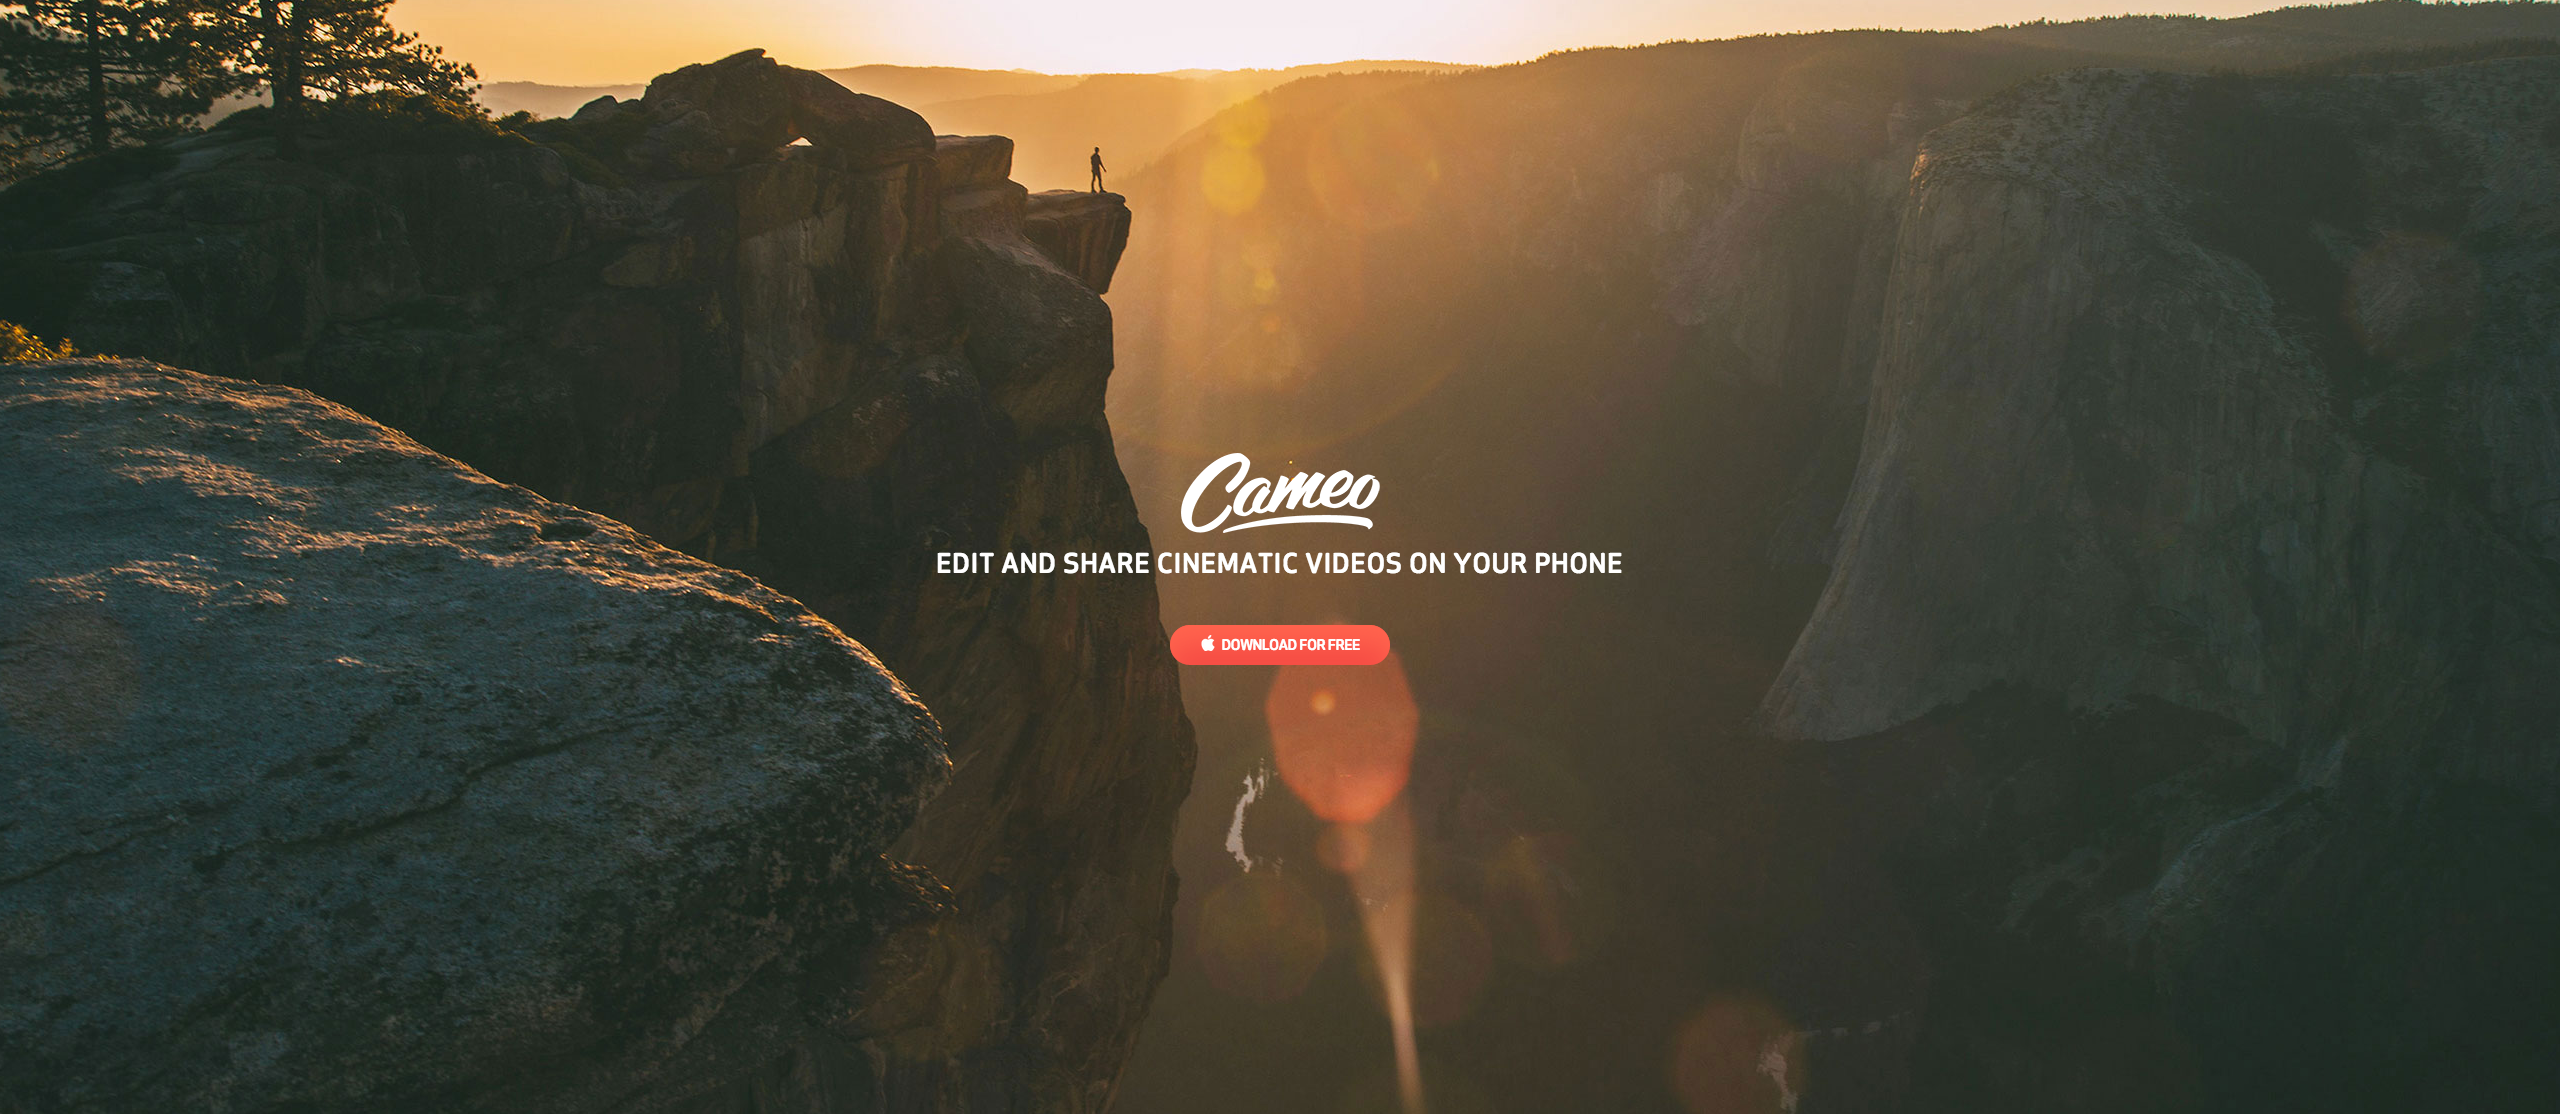 Cameo, Vimeo's Mobile Editing App, Just Shed its Dead Weight and Got Way, Way Better